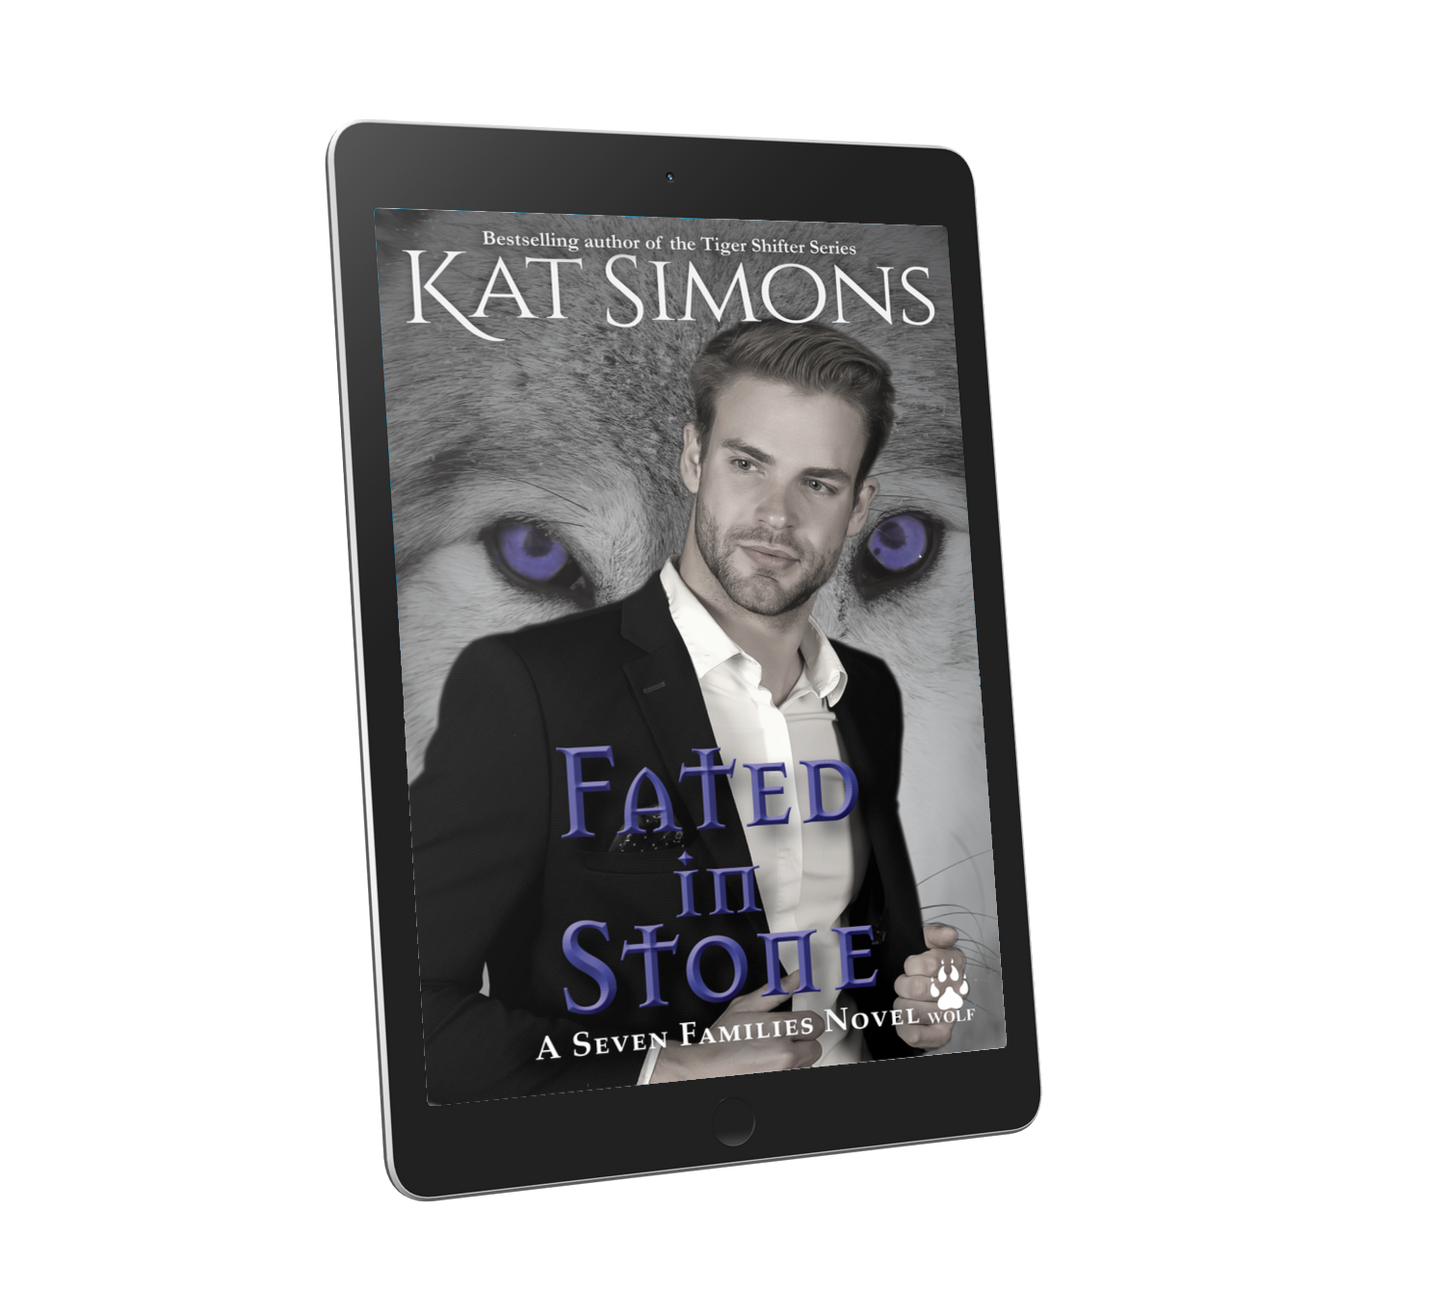 Cover art for Fated in Stone, gray scale wolf in background with blue eyes, handsome blond man in foreground, title on bottom in blue, author name at top in white